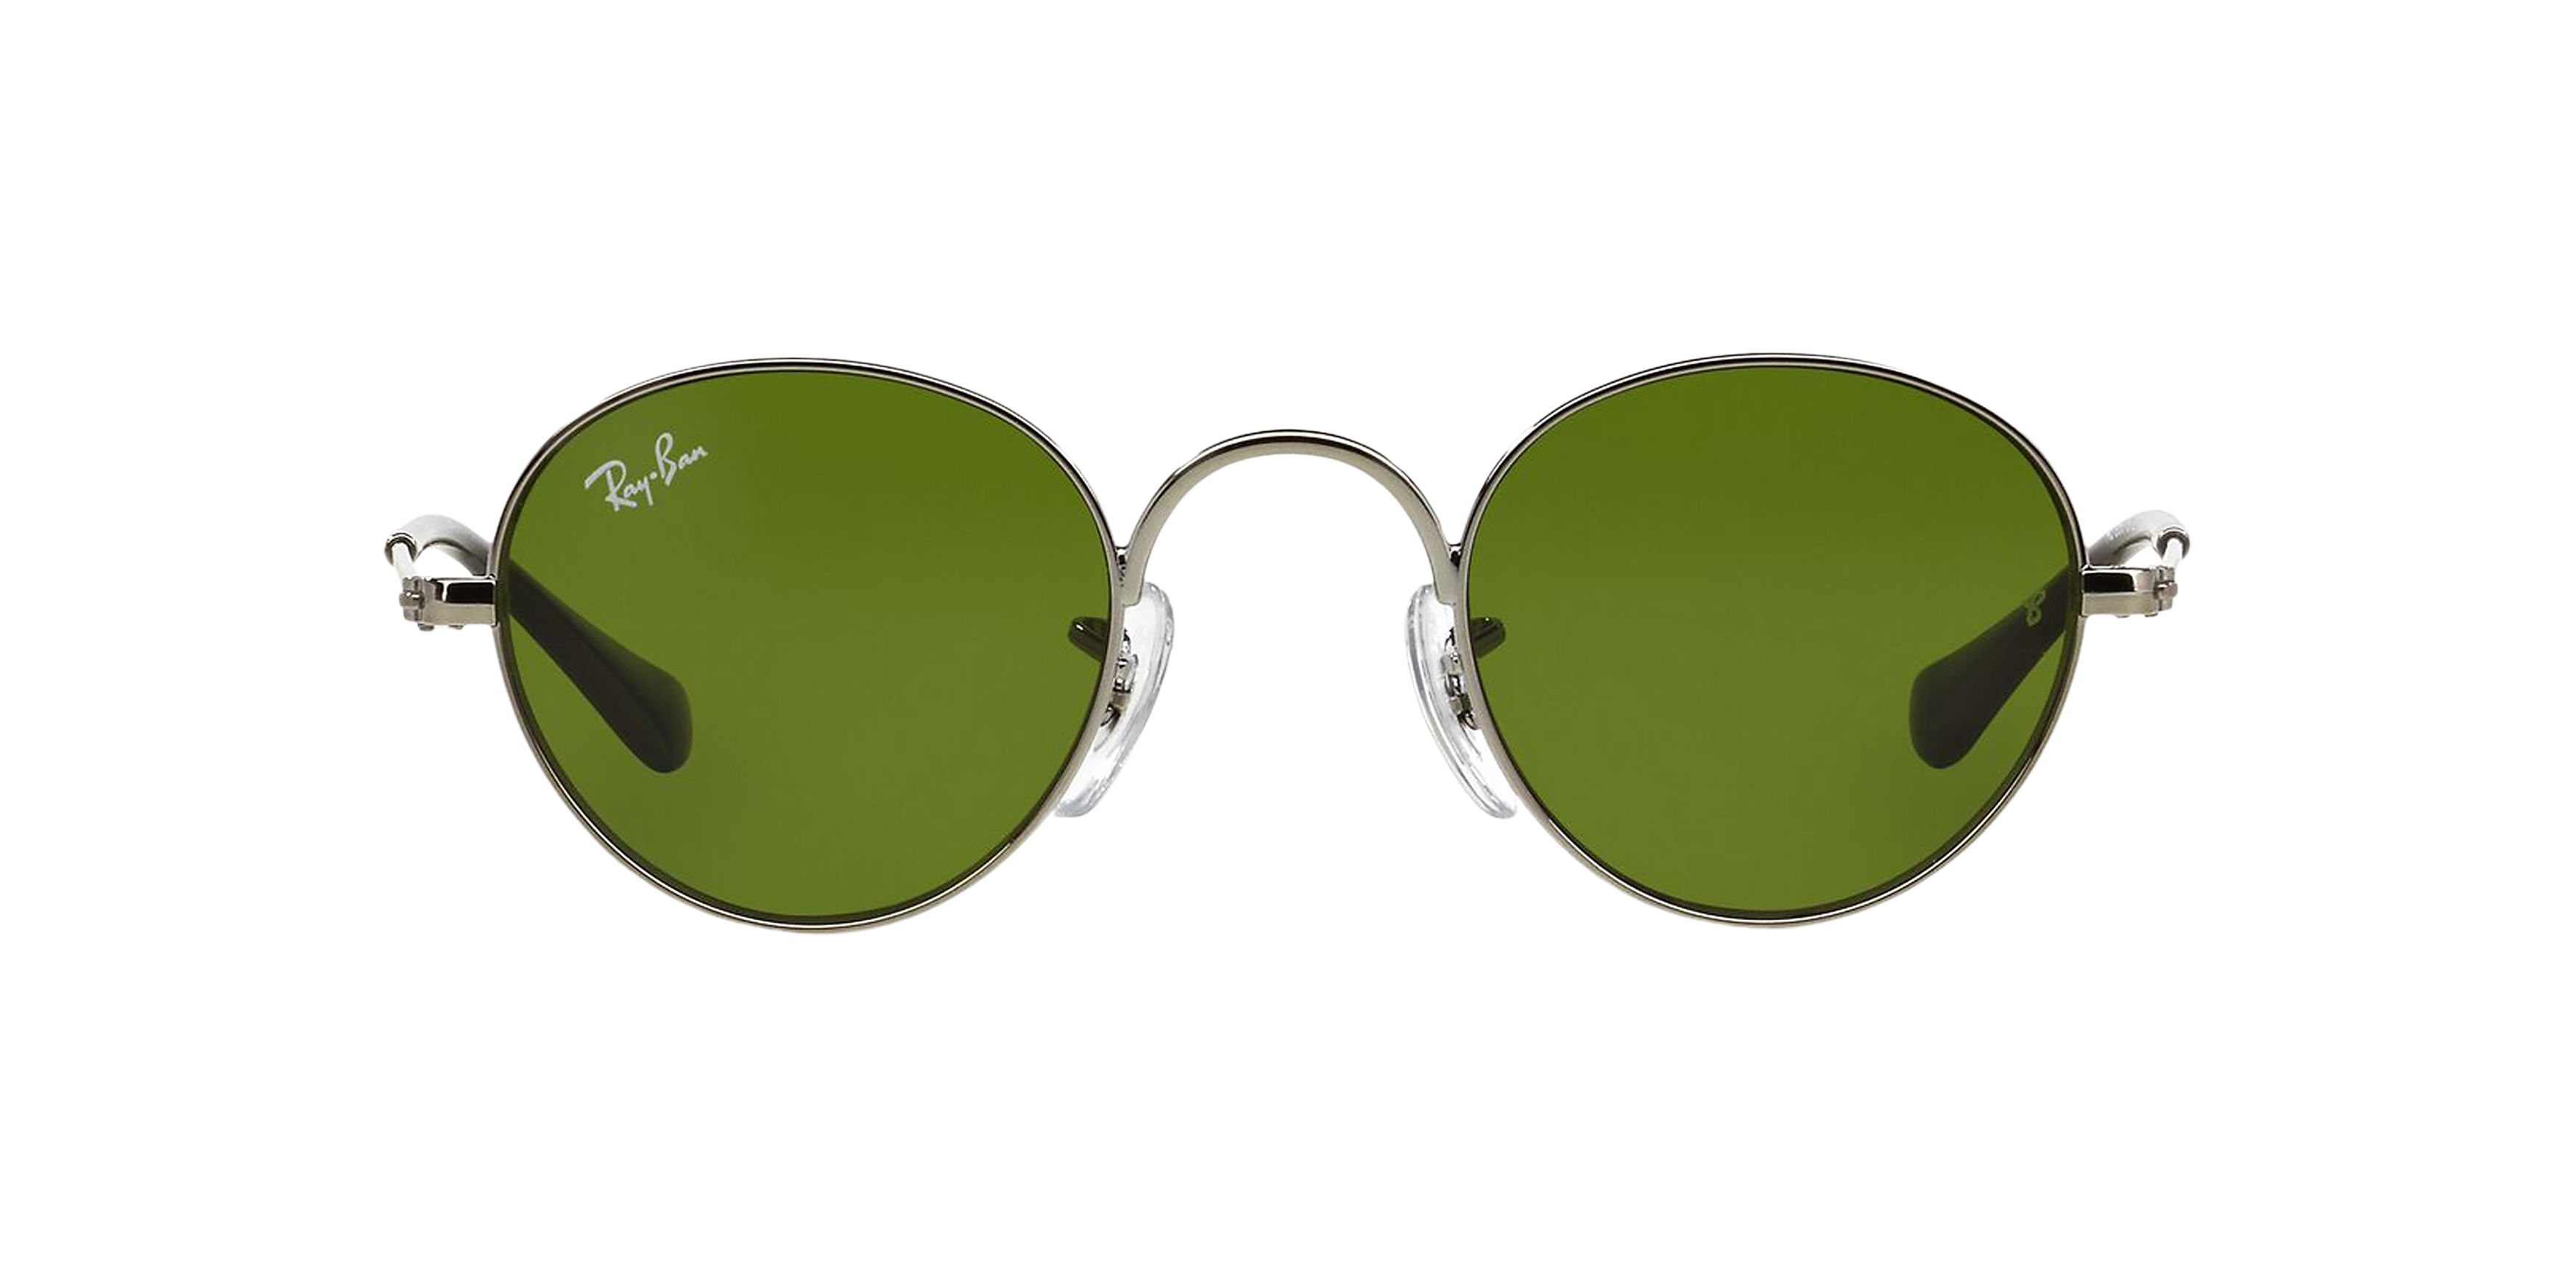 [products.image.front] Ray-Ban Junior RJ9537S 200